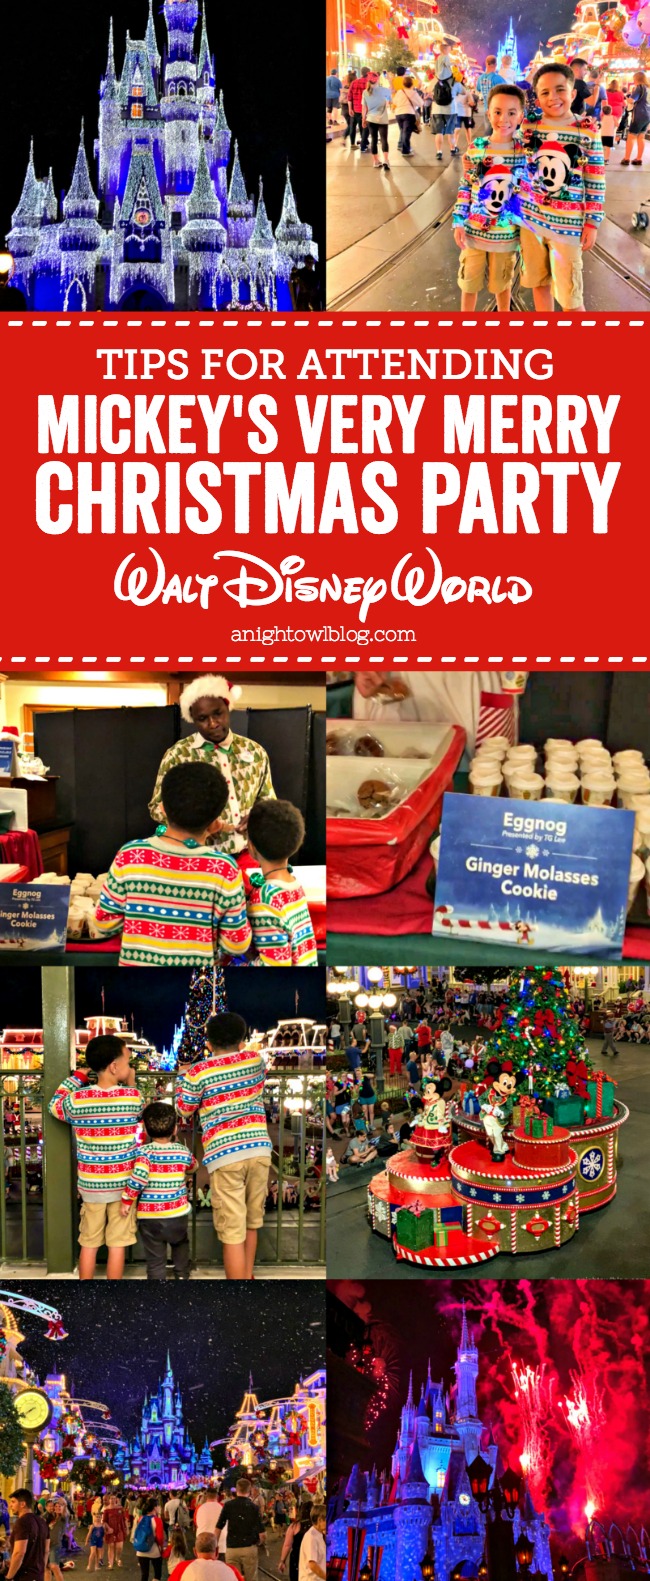 The after hours event is full of live entertainment and holiday cheer. Here are some great Mickey's Very Merry Christmas party tips.